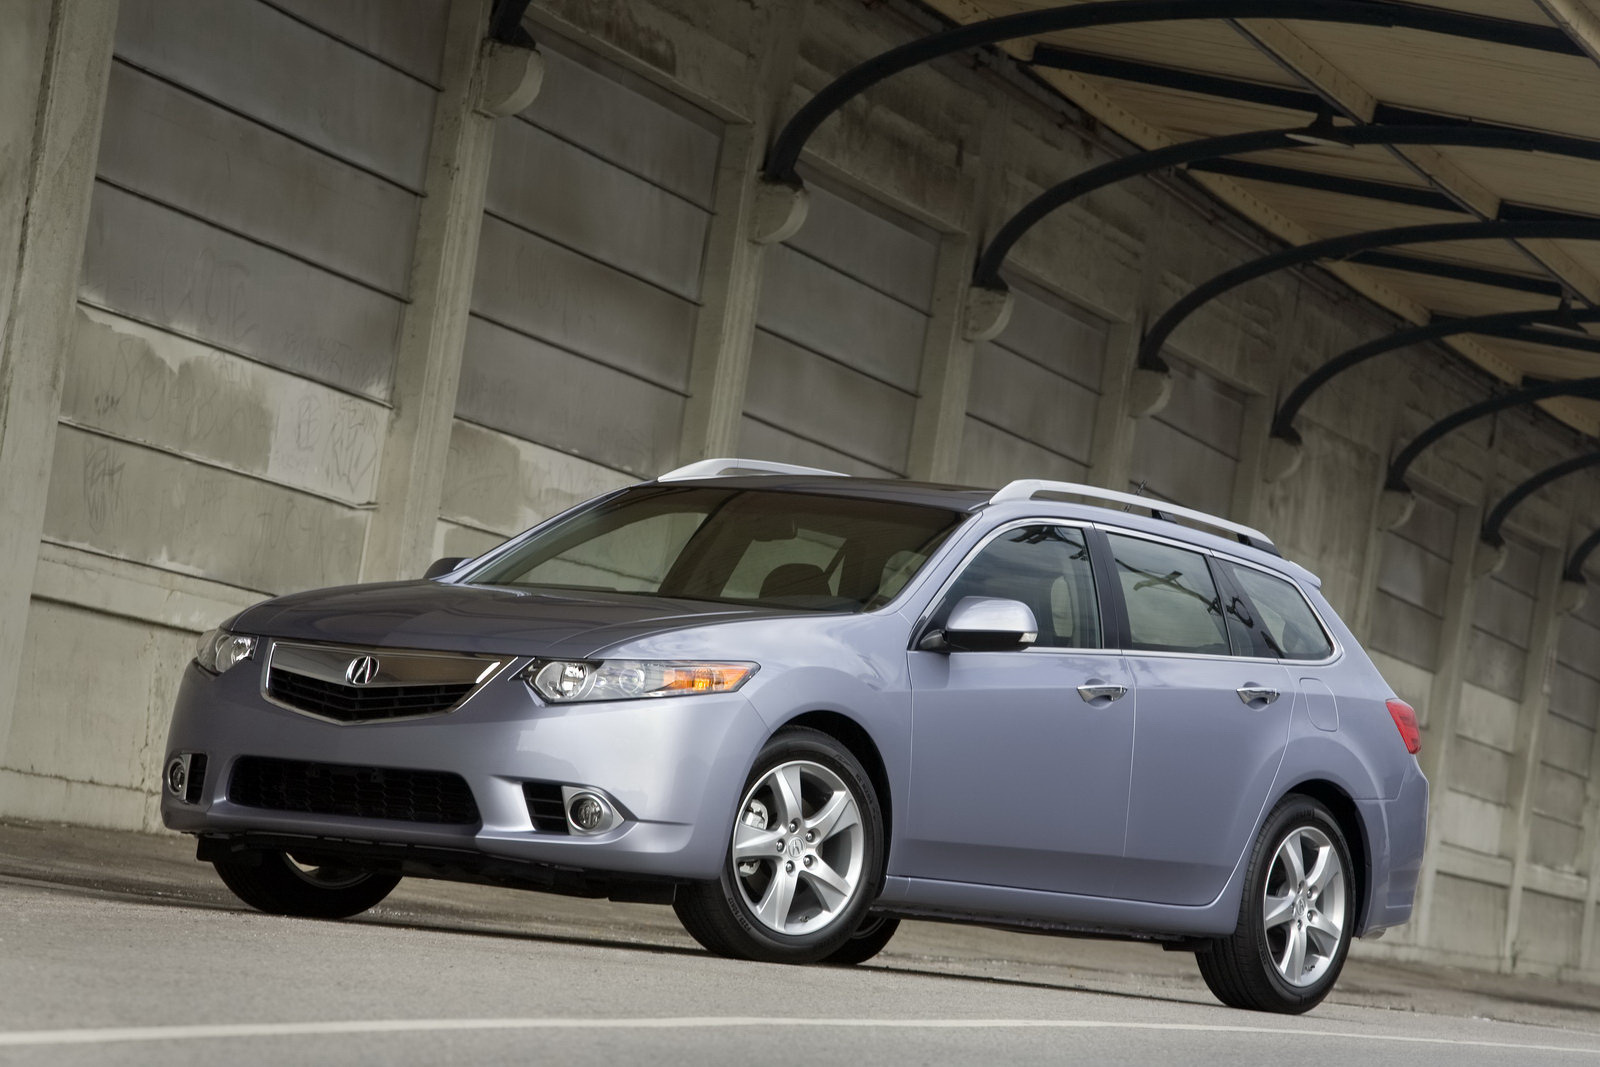 2011 Acura TSX Sport Wagon Pricing Announced | Carscoops1600 x 1067